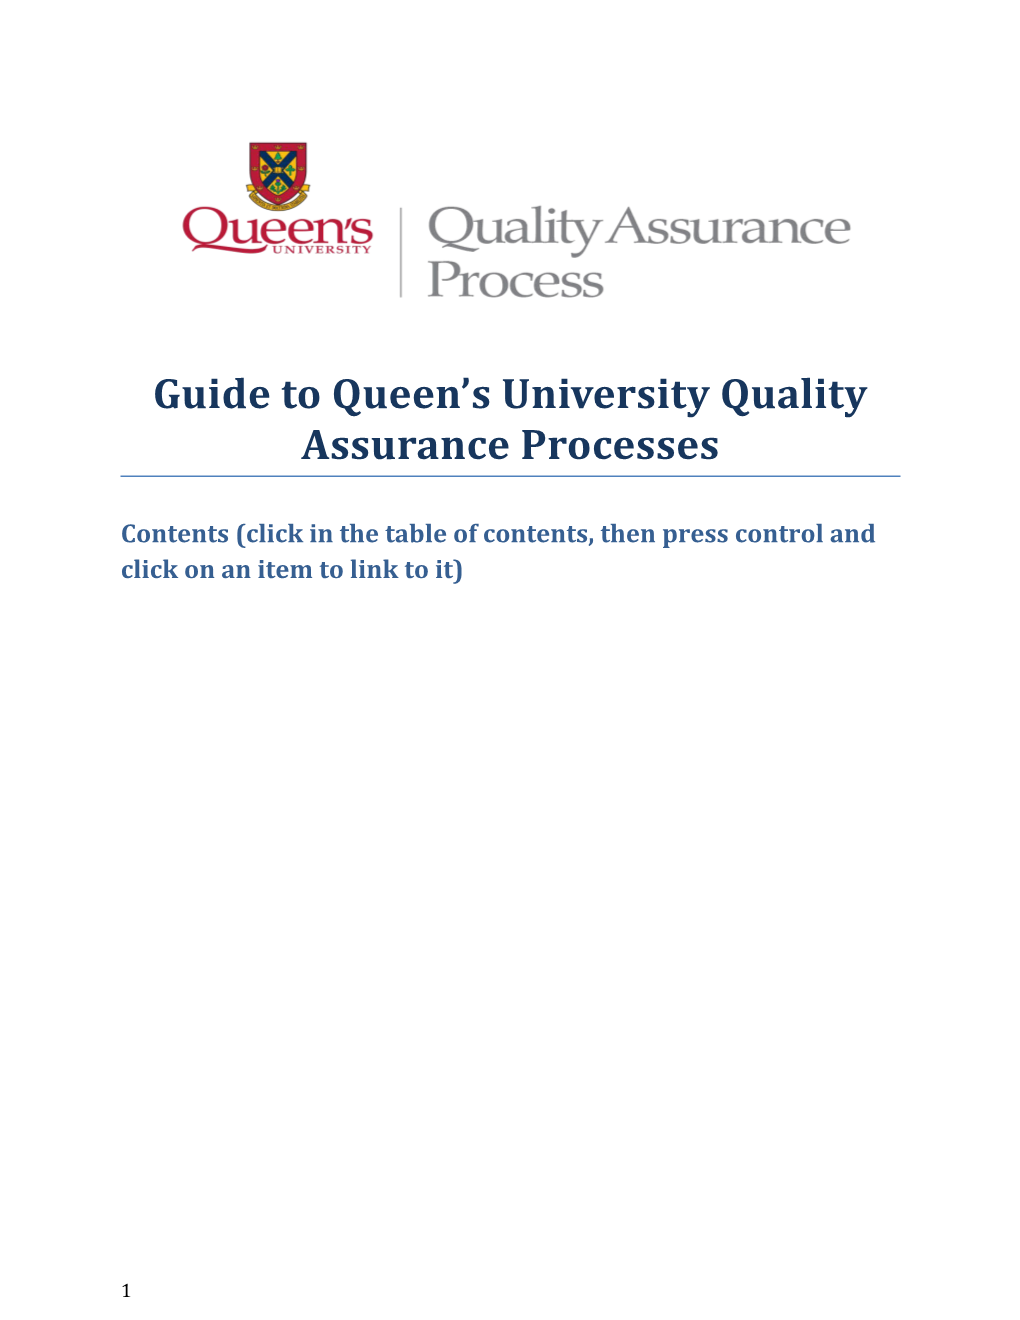 Guide to Queen S University Quality Assurance Processes